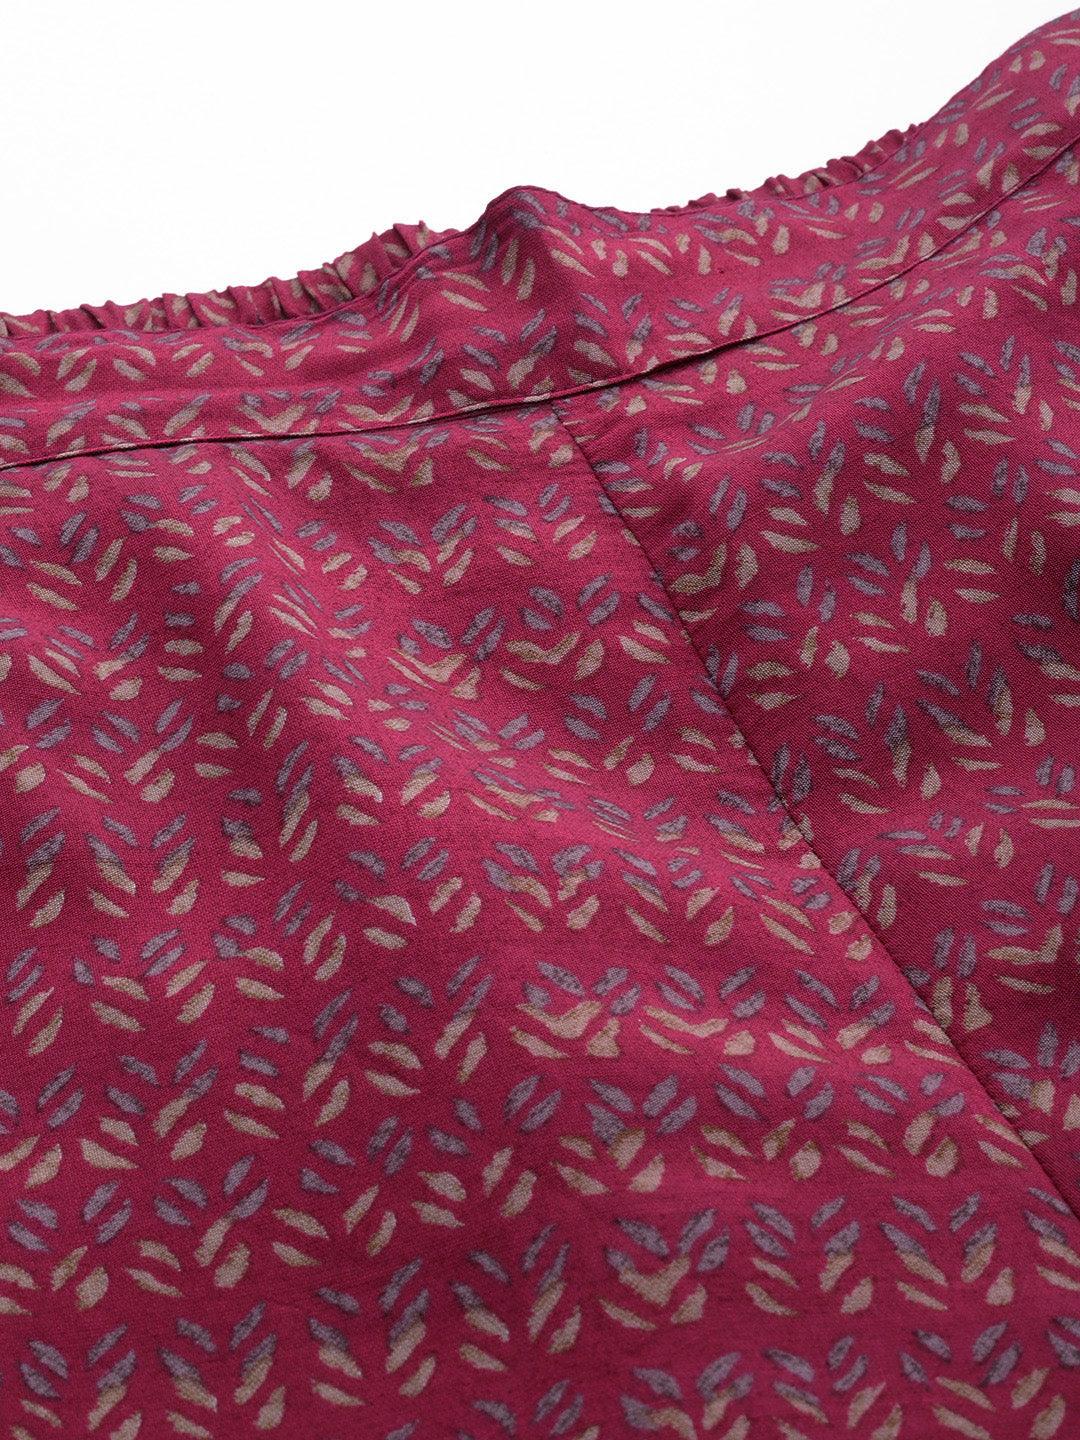 Maroon Printed Silk Blend Top With Trousers